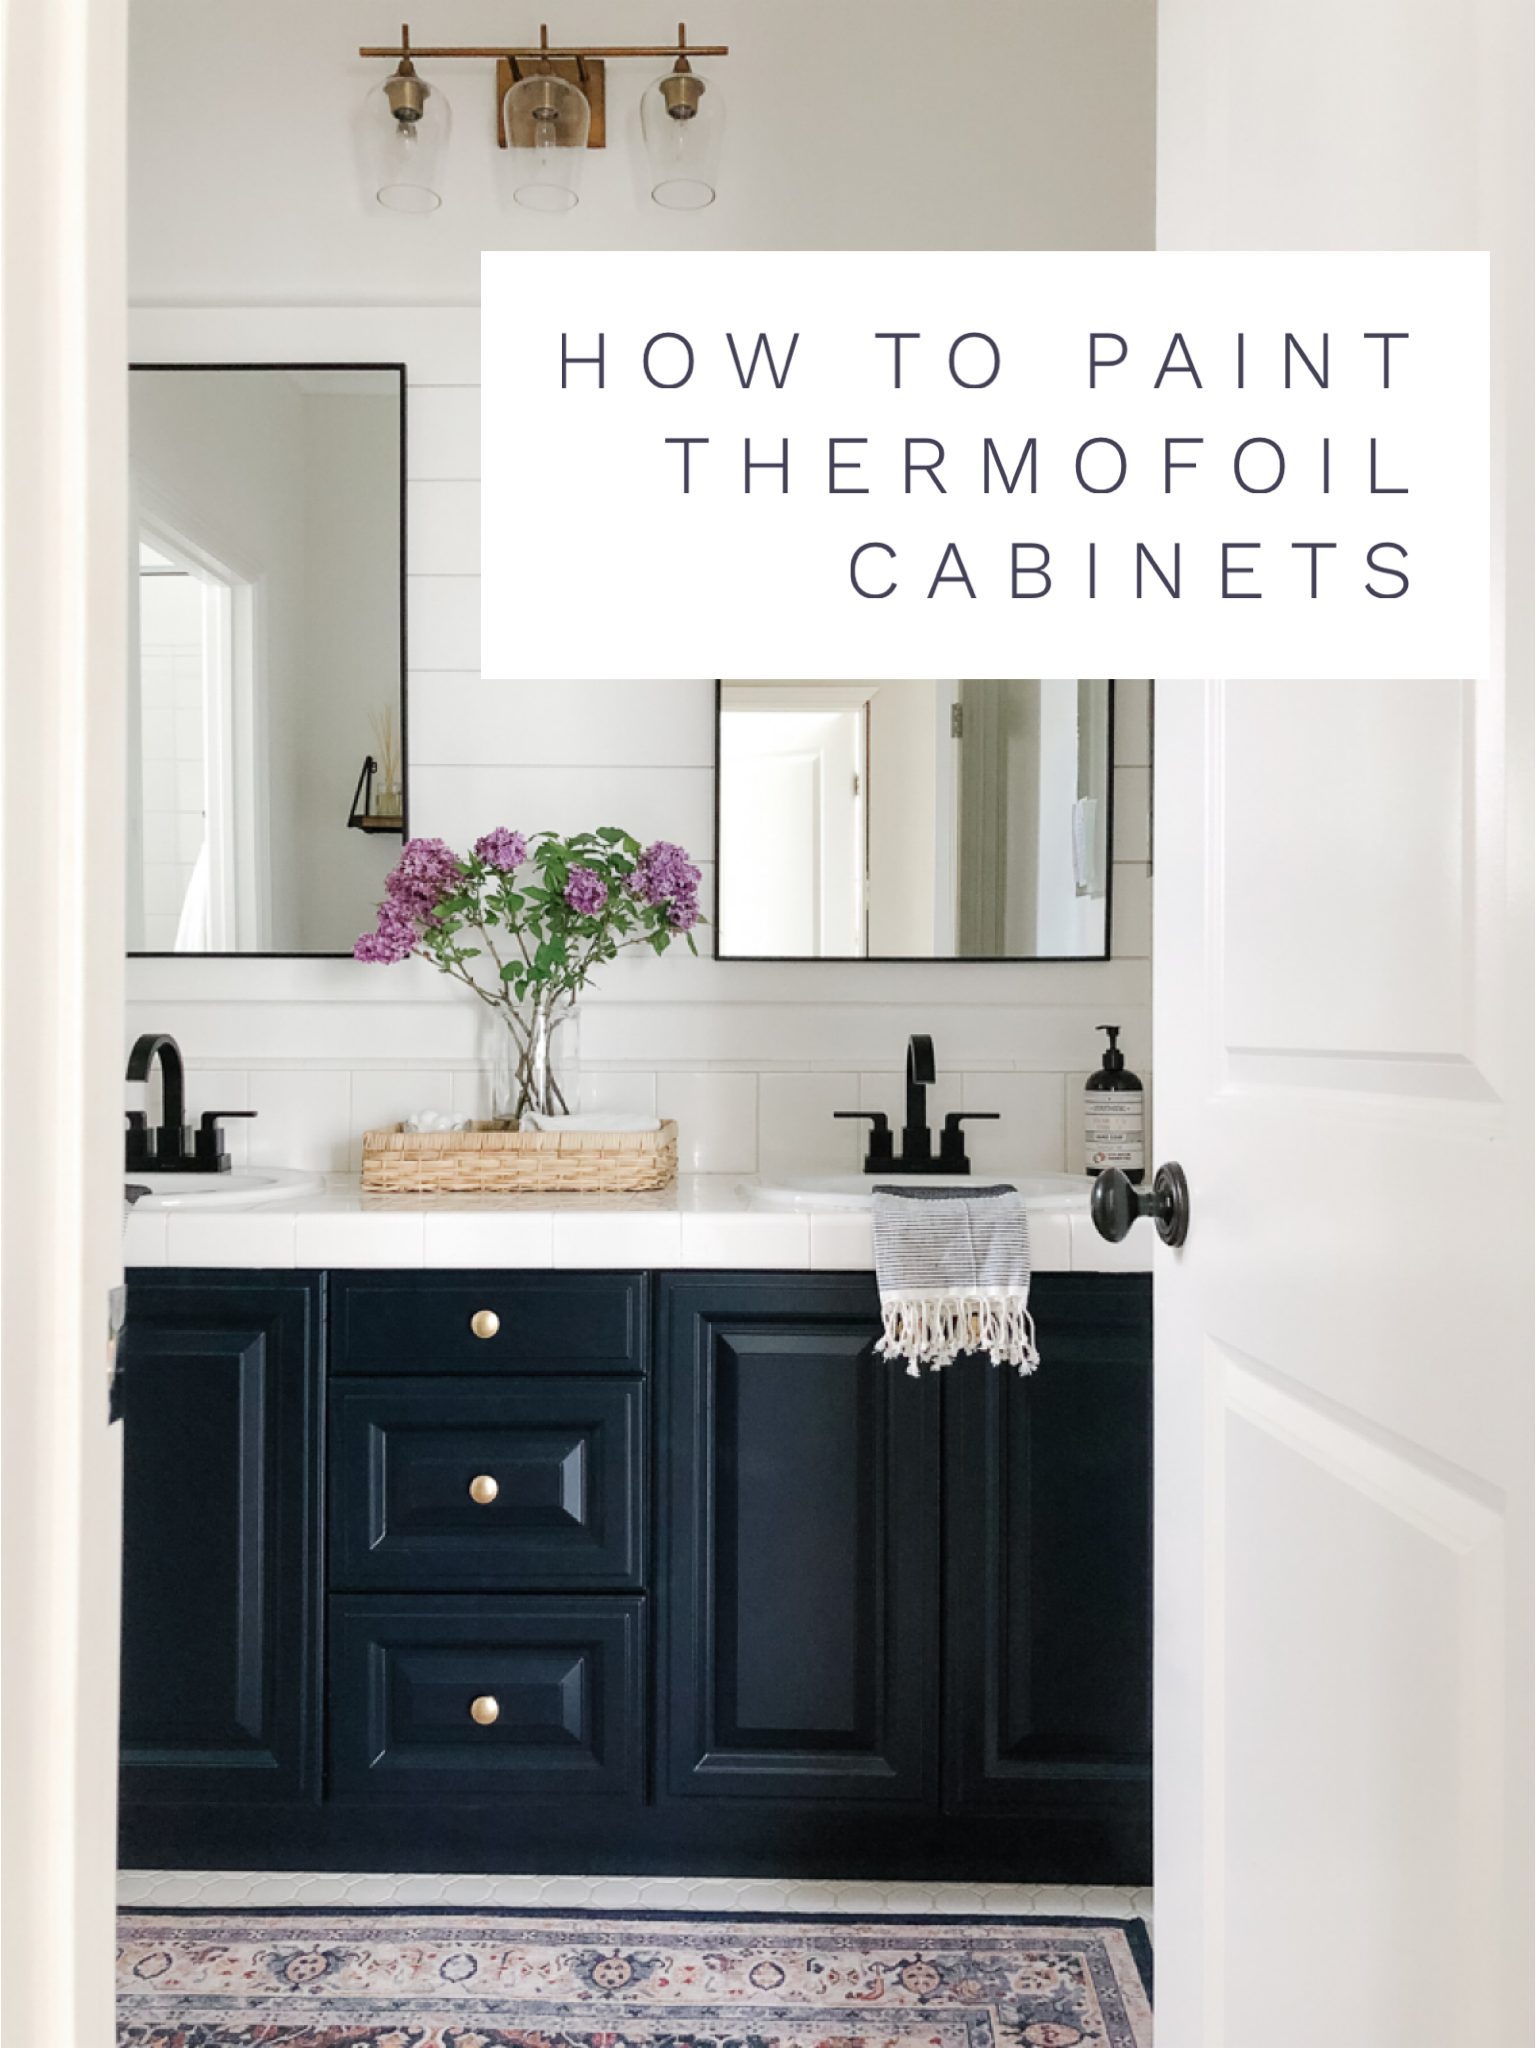 How To Paint Theril Cabinets A, Can You Paint Laminate Vanity Cabinets